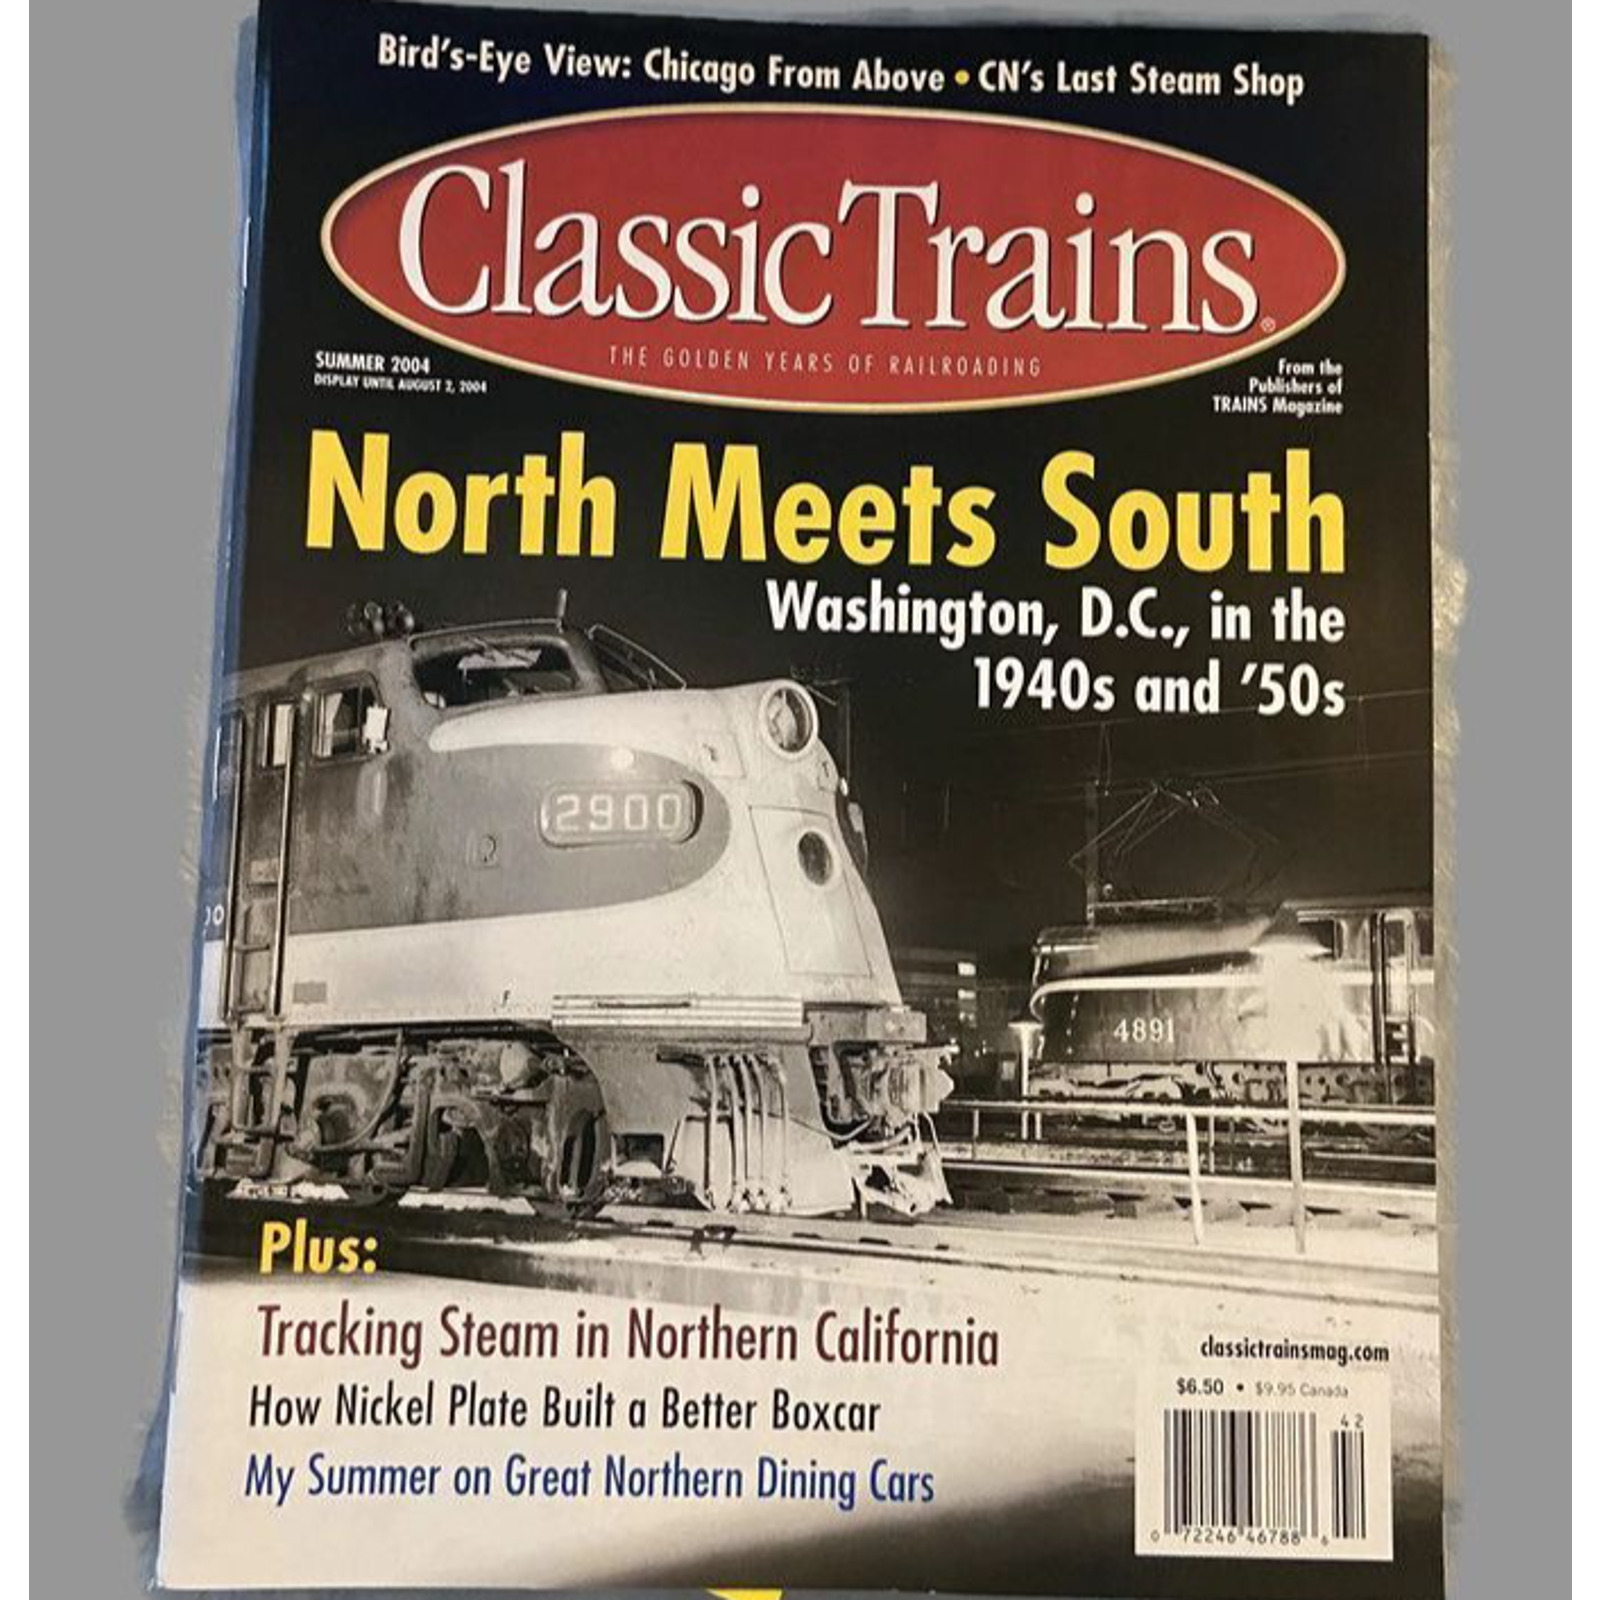 Classic Trains Magazine Summer 2004 North Meets South Great Northern Dining Cars